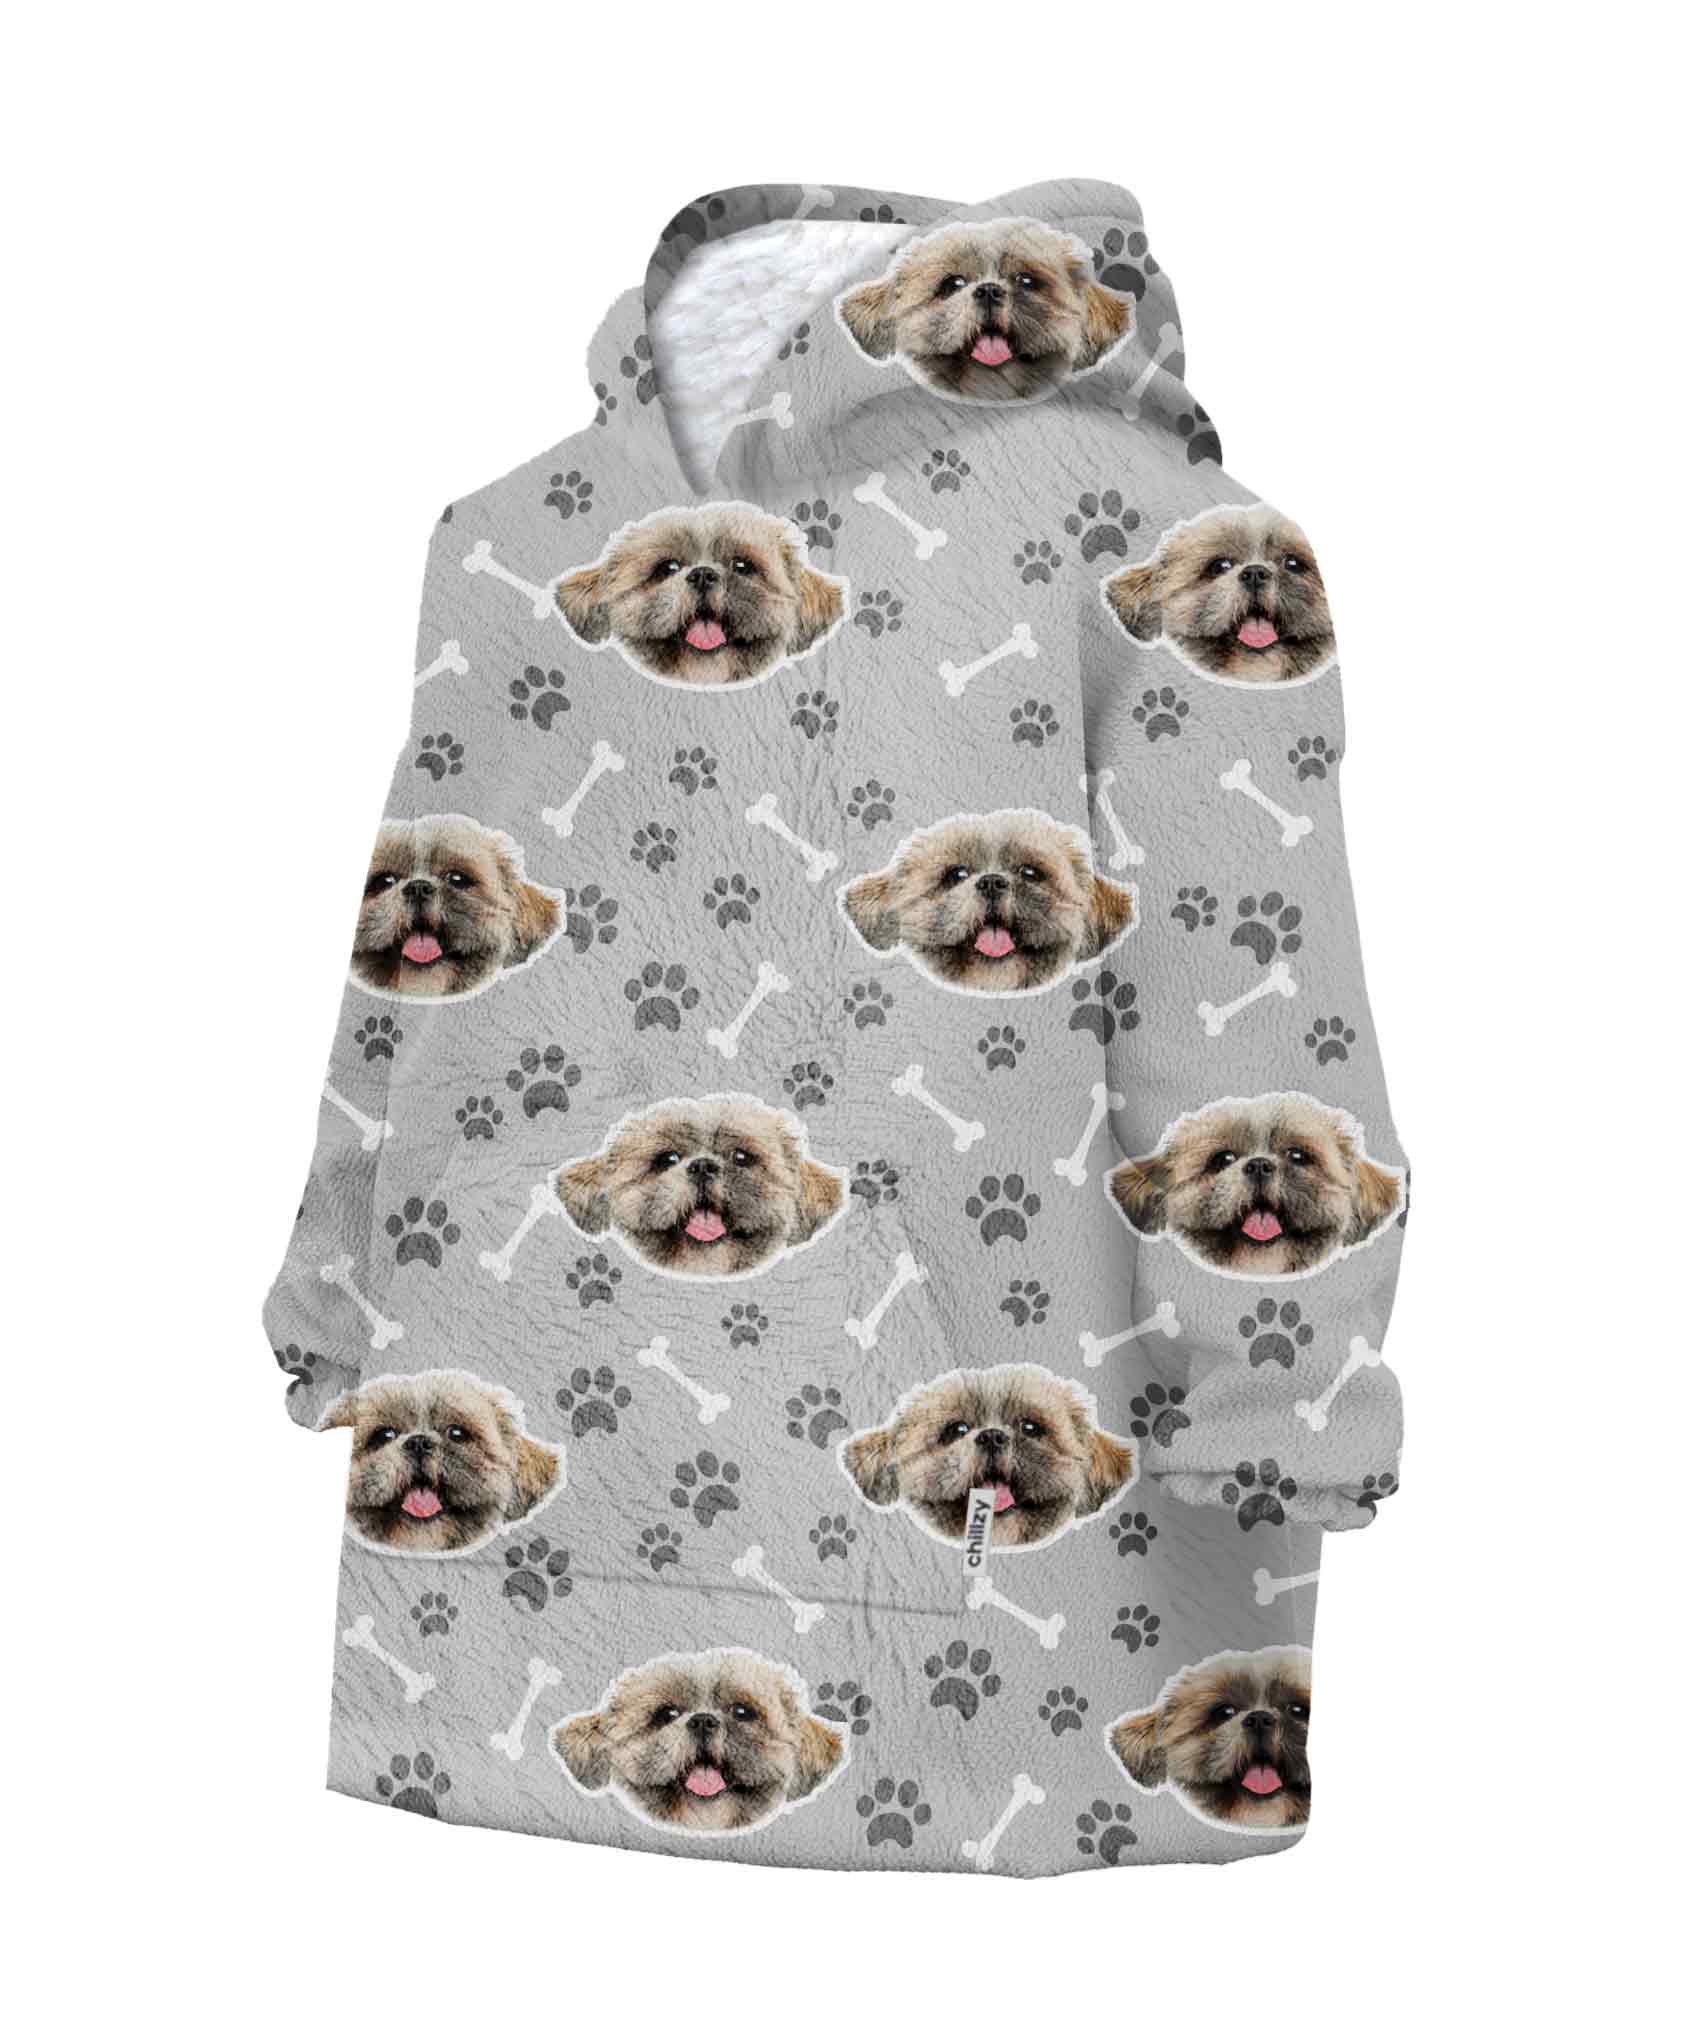 Your Dog Chillzy Kids Hoodie Blanket